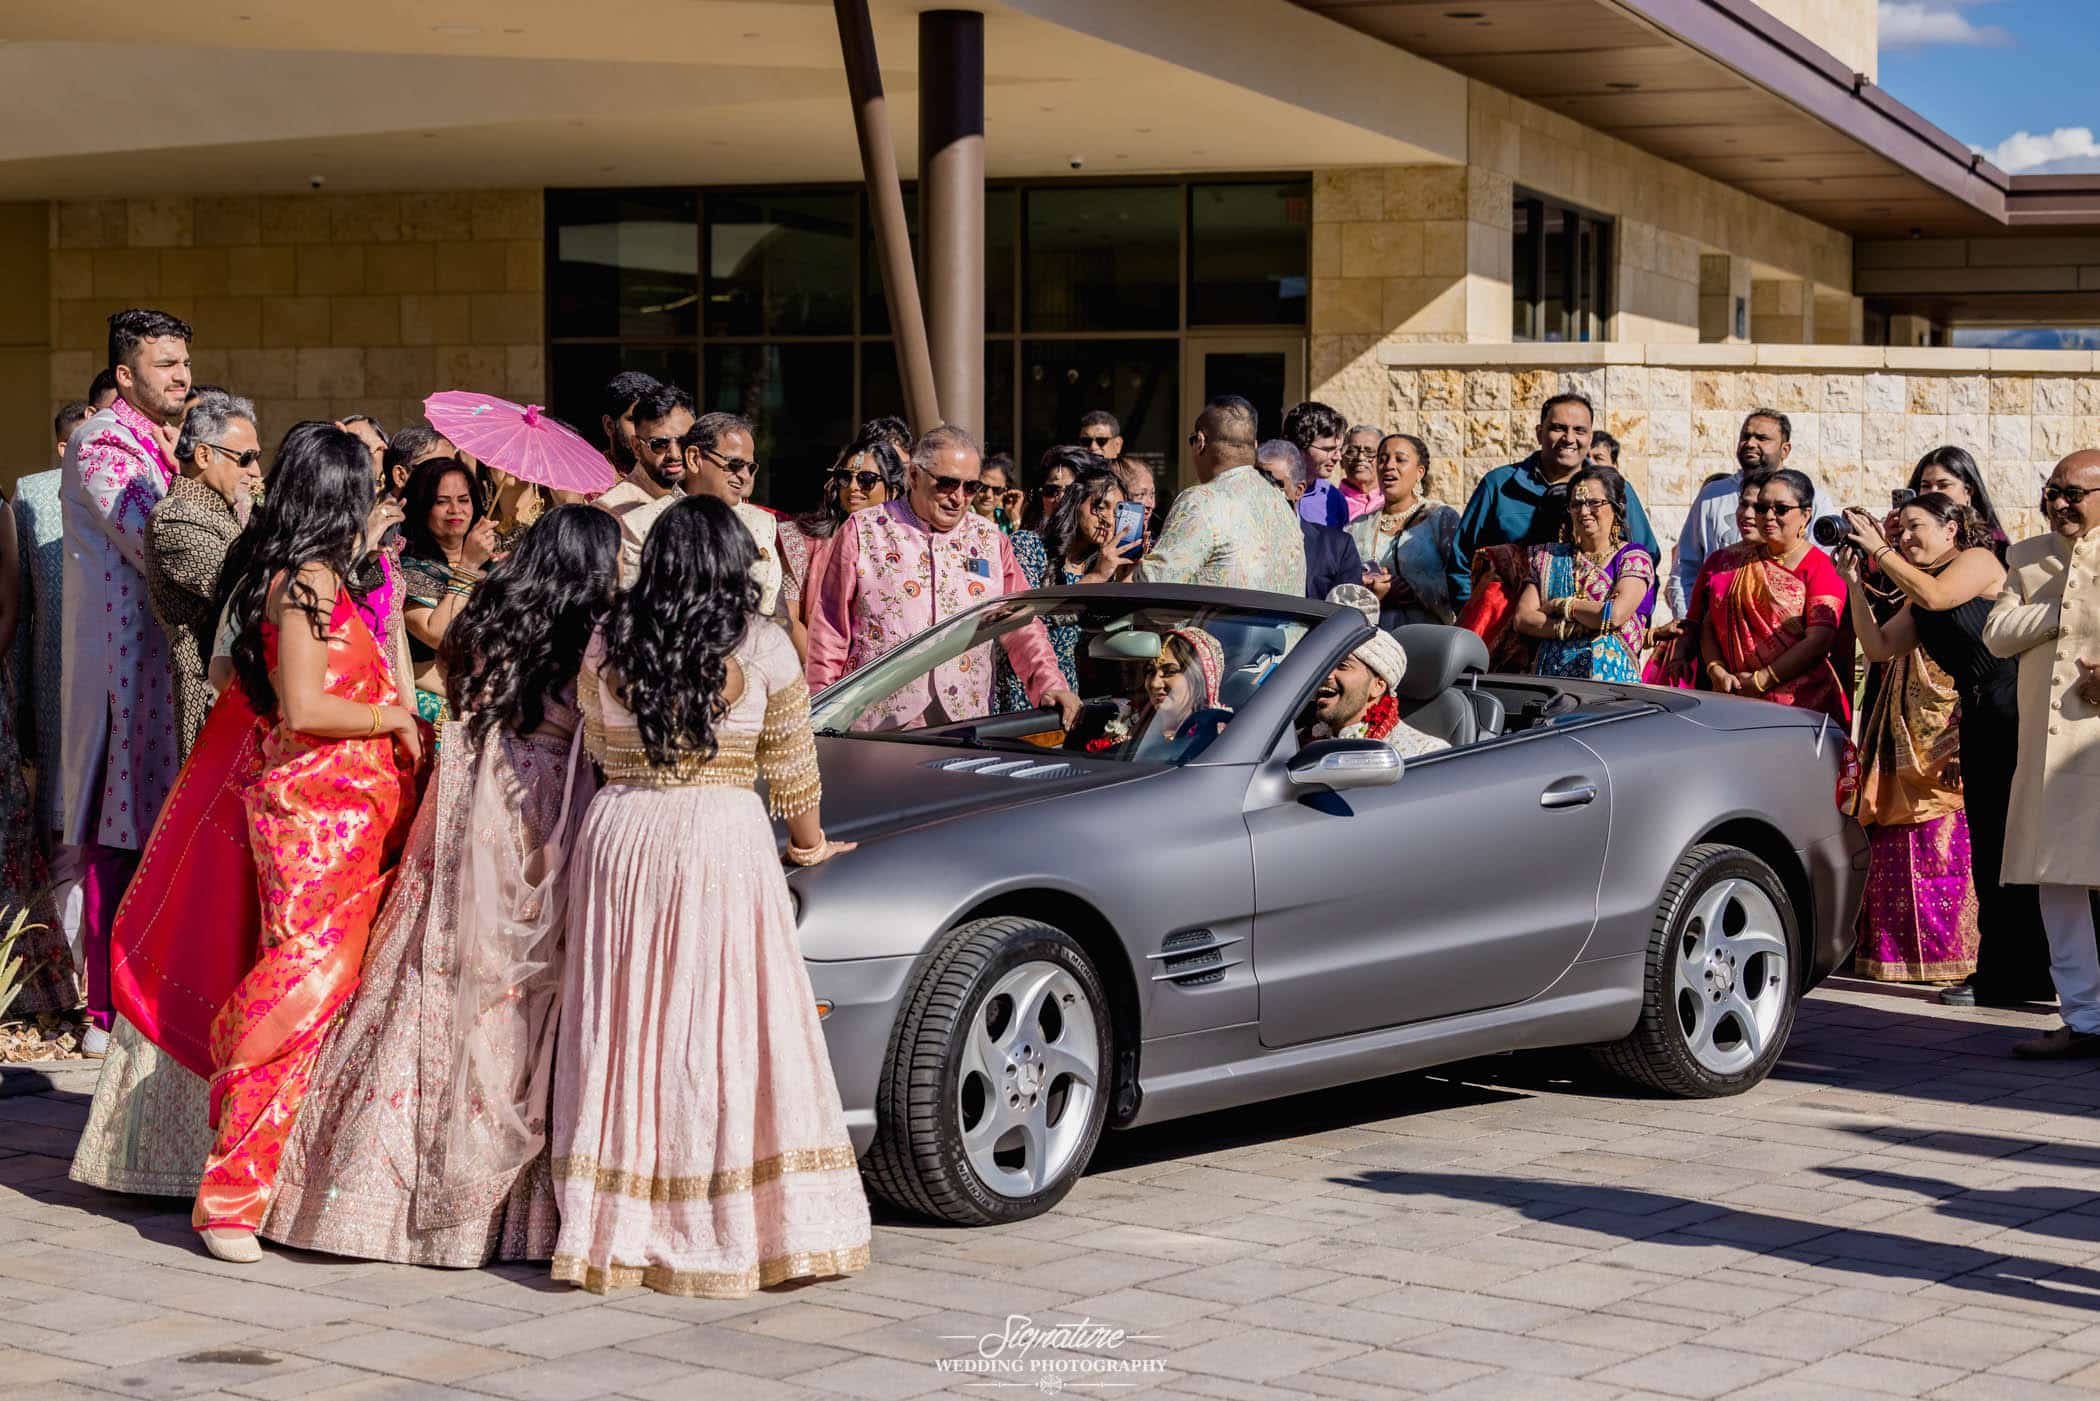 Wedding guests waving at bride and groom in car